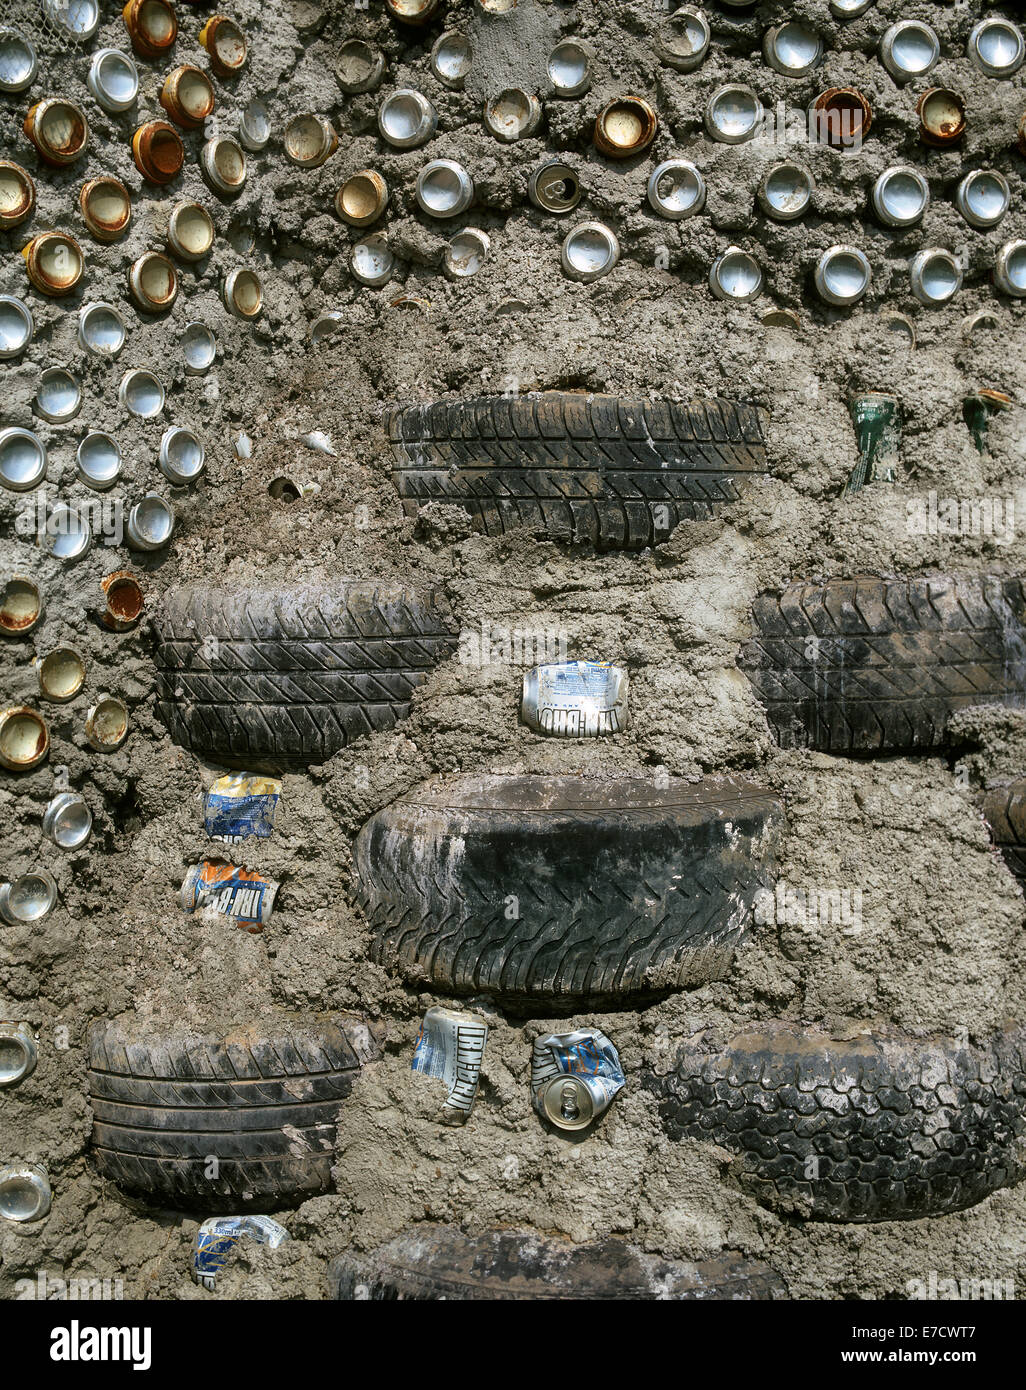 Close up of the Fife Earthship under construction showing an exposed earth wall incorporating used vehicle tyres and drinks cans. Stock Photo